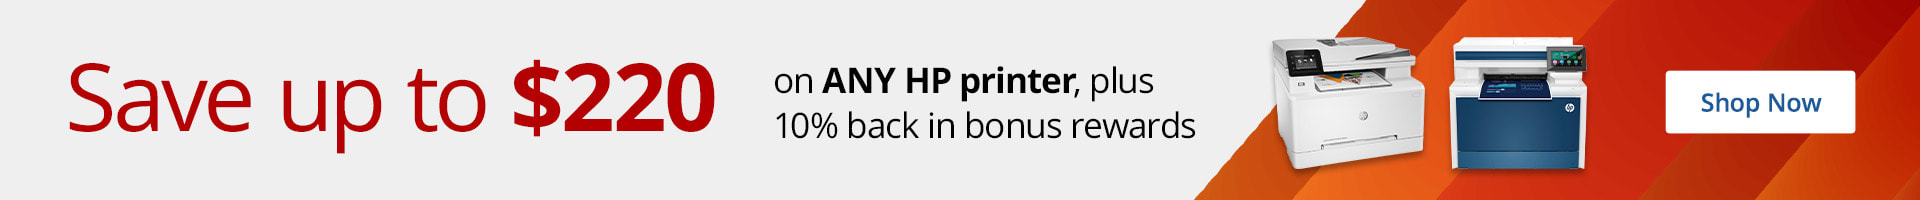 Save up to $220 on HP printers + 1-% back in rewards on any HP Printer